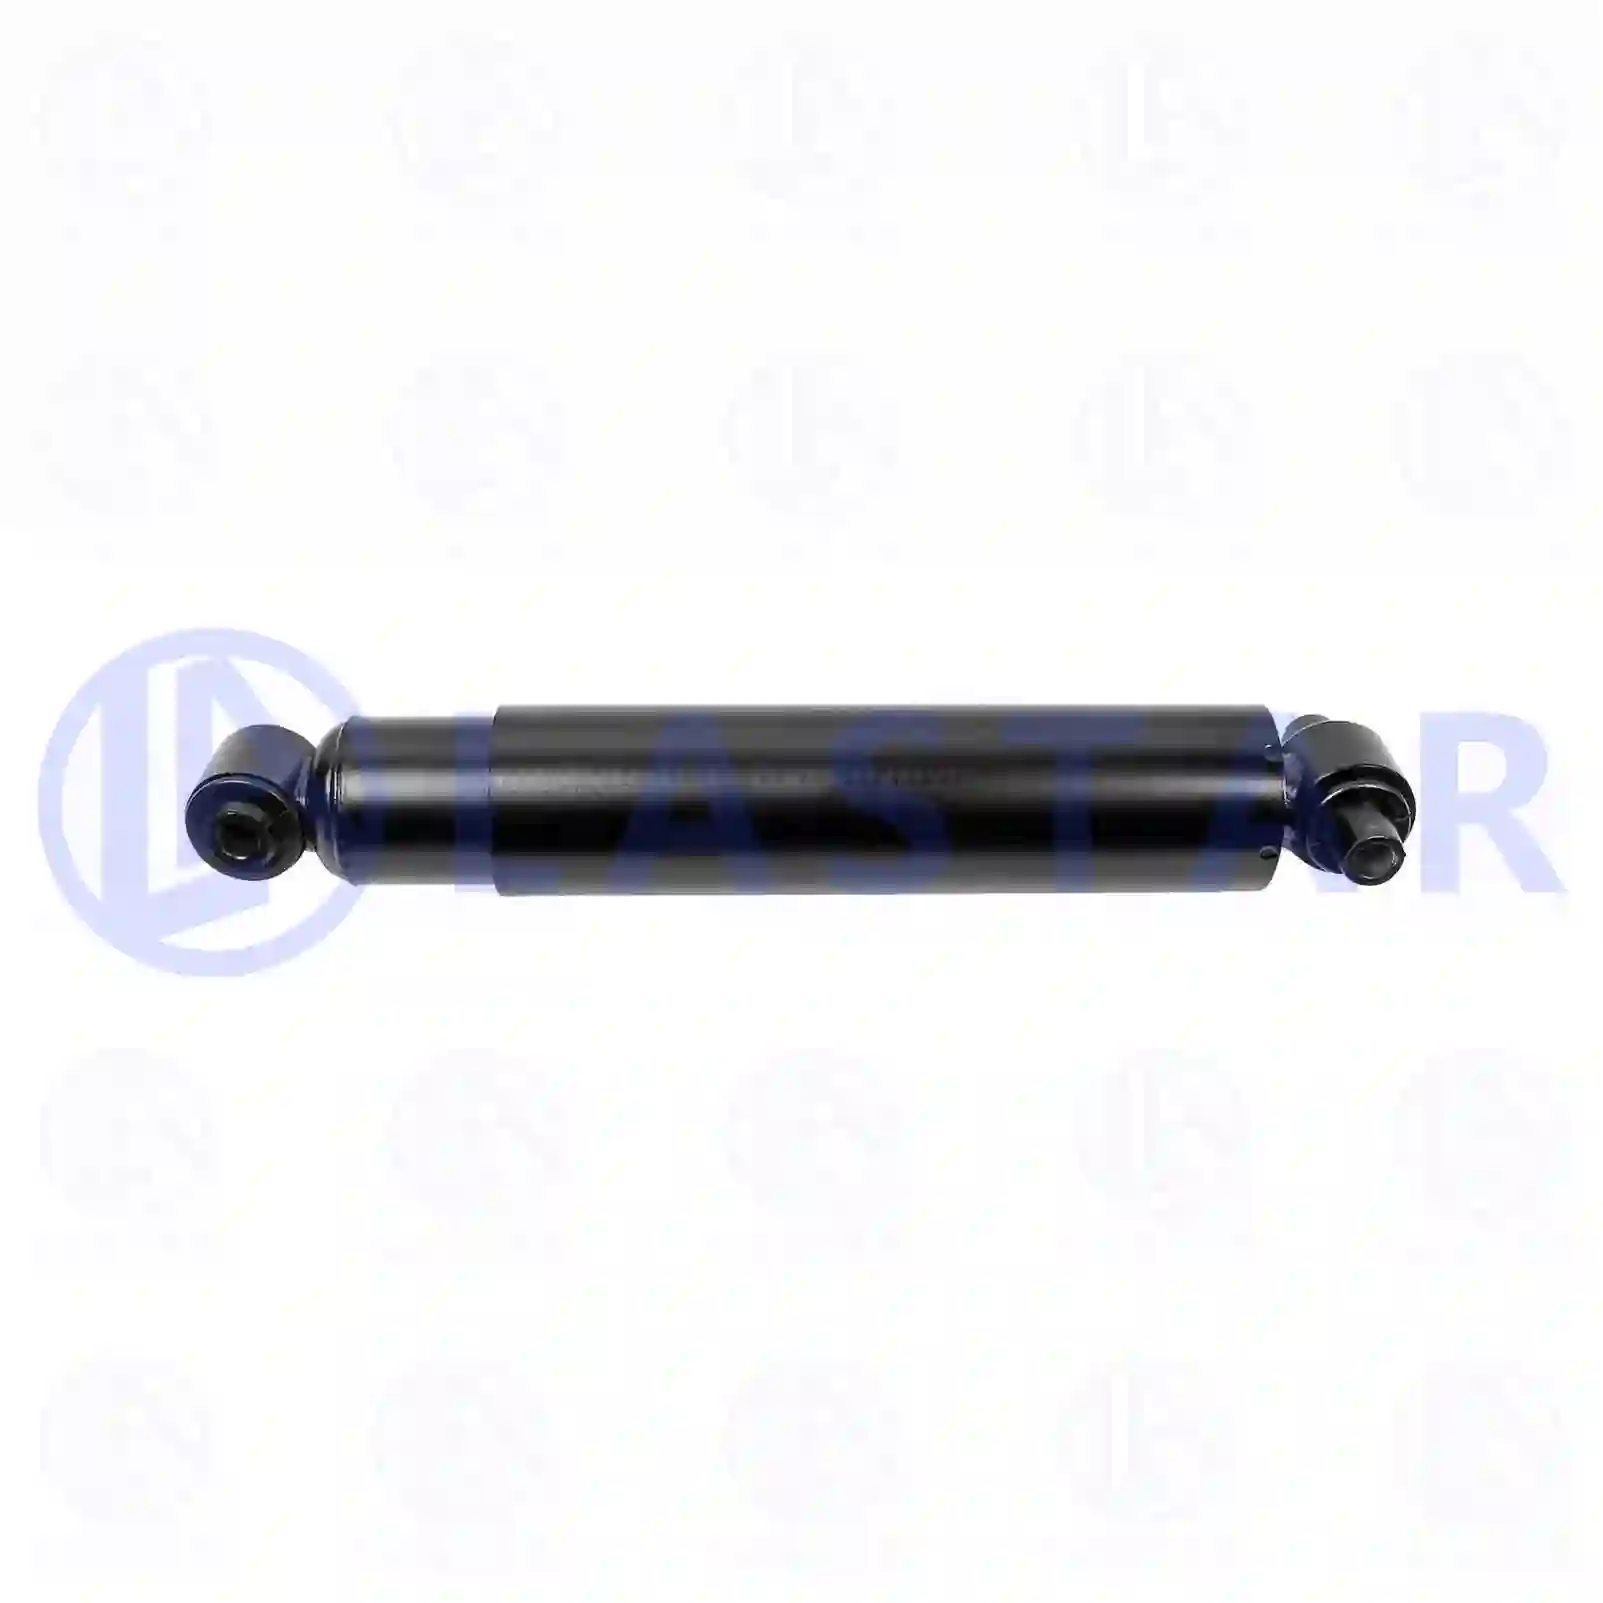 Shock absorber, 77729730, 21172373, ZG41576-0008 ||  77729730 Lastar Spare Part | Truck Spare Parts, Auotomotive Spare Parts Shock absorber, 77729730, 21172373, ZG41576-0008 ||  77729730 Lastar Spare Part | Truck Spare Parts, Auotomotive Spare Parts